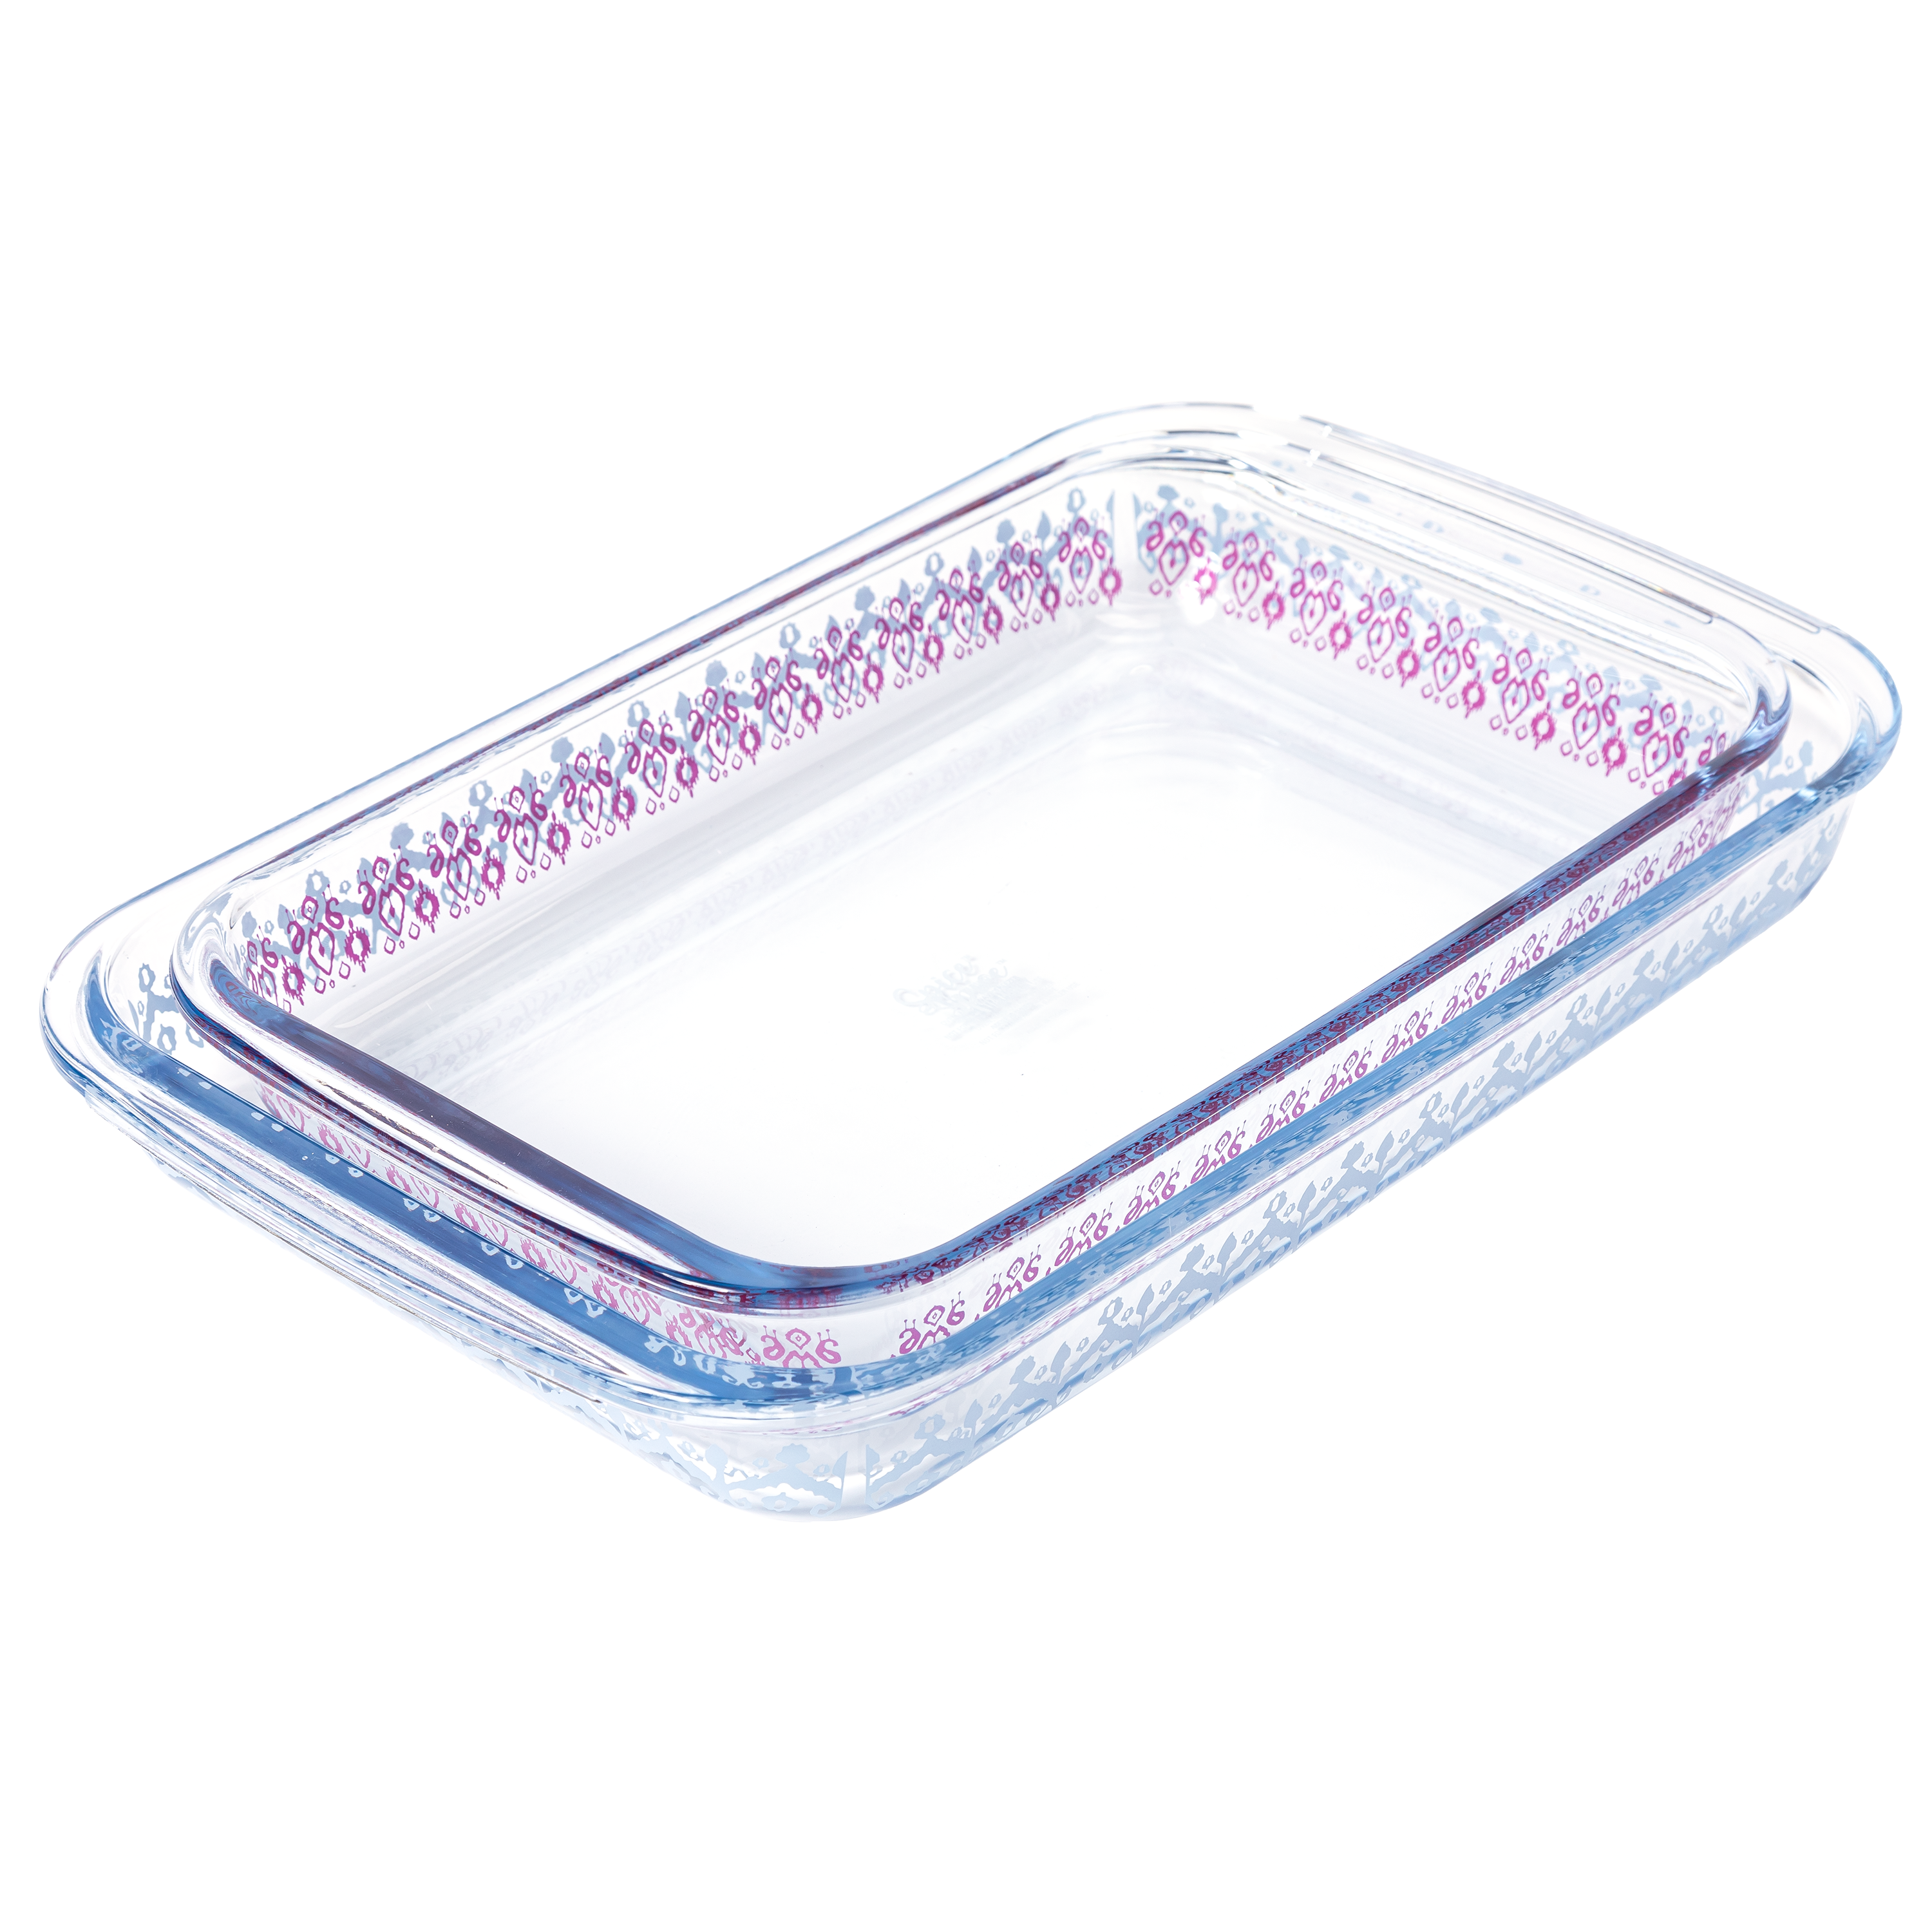 Small-2 Quart Glass Baking Dish for Oven, 2 Pack Single Serving Glass Pan  for Cooking Oblong Casserole Dish Rectangular Baking Pan Glass Bakeware